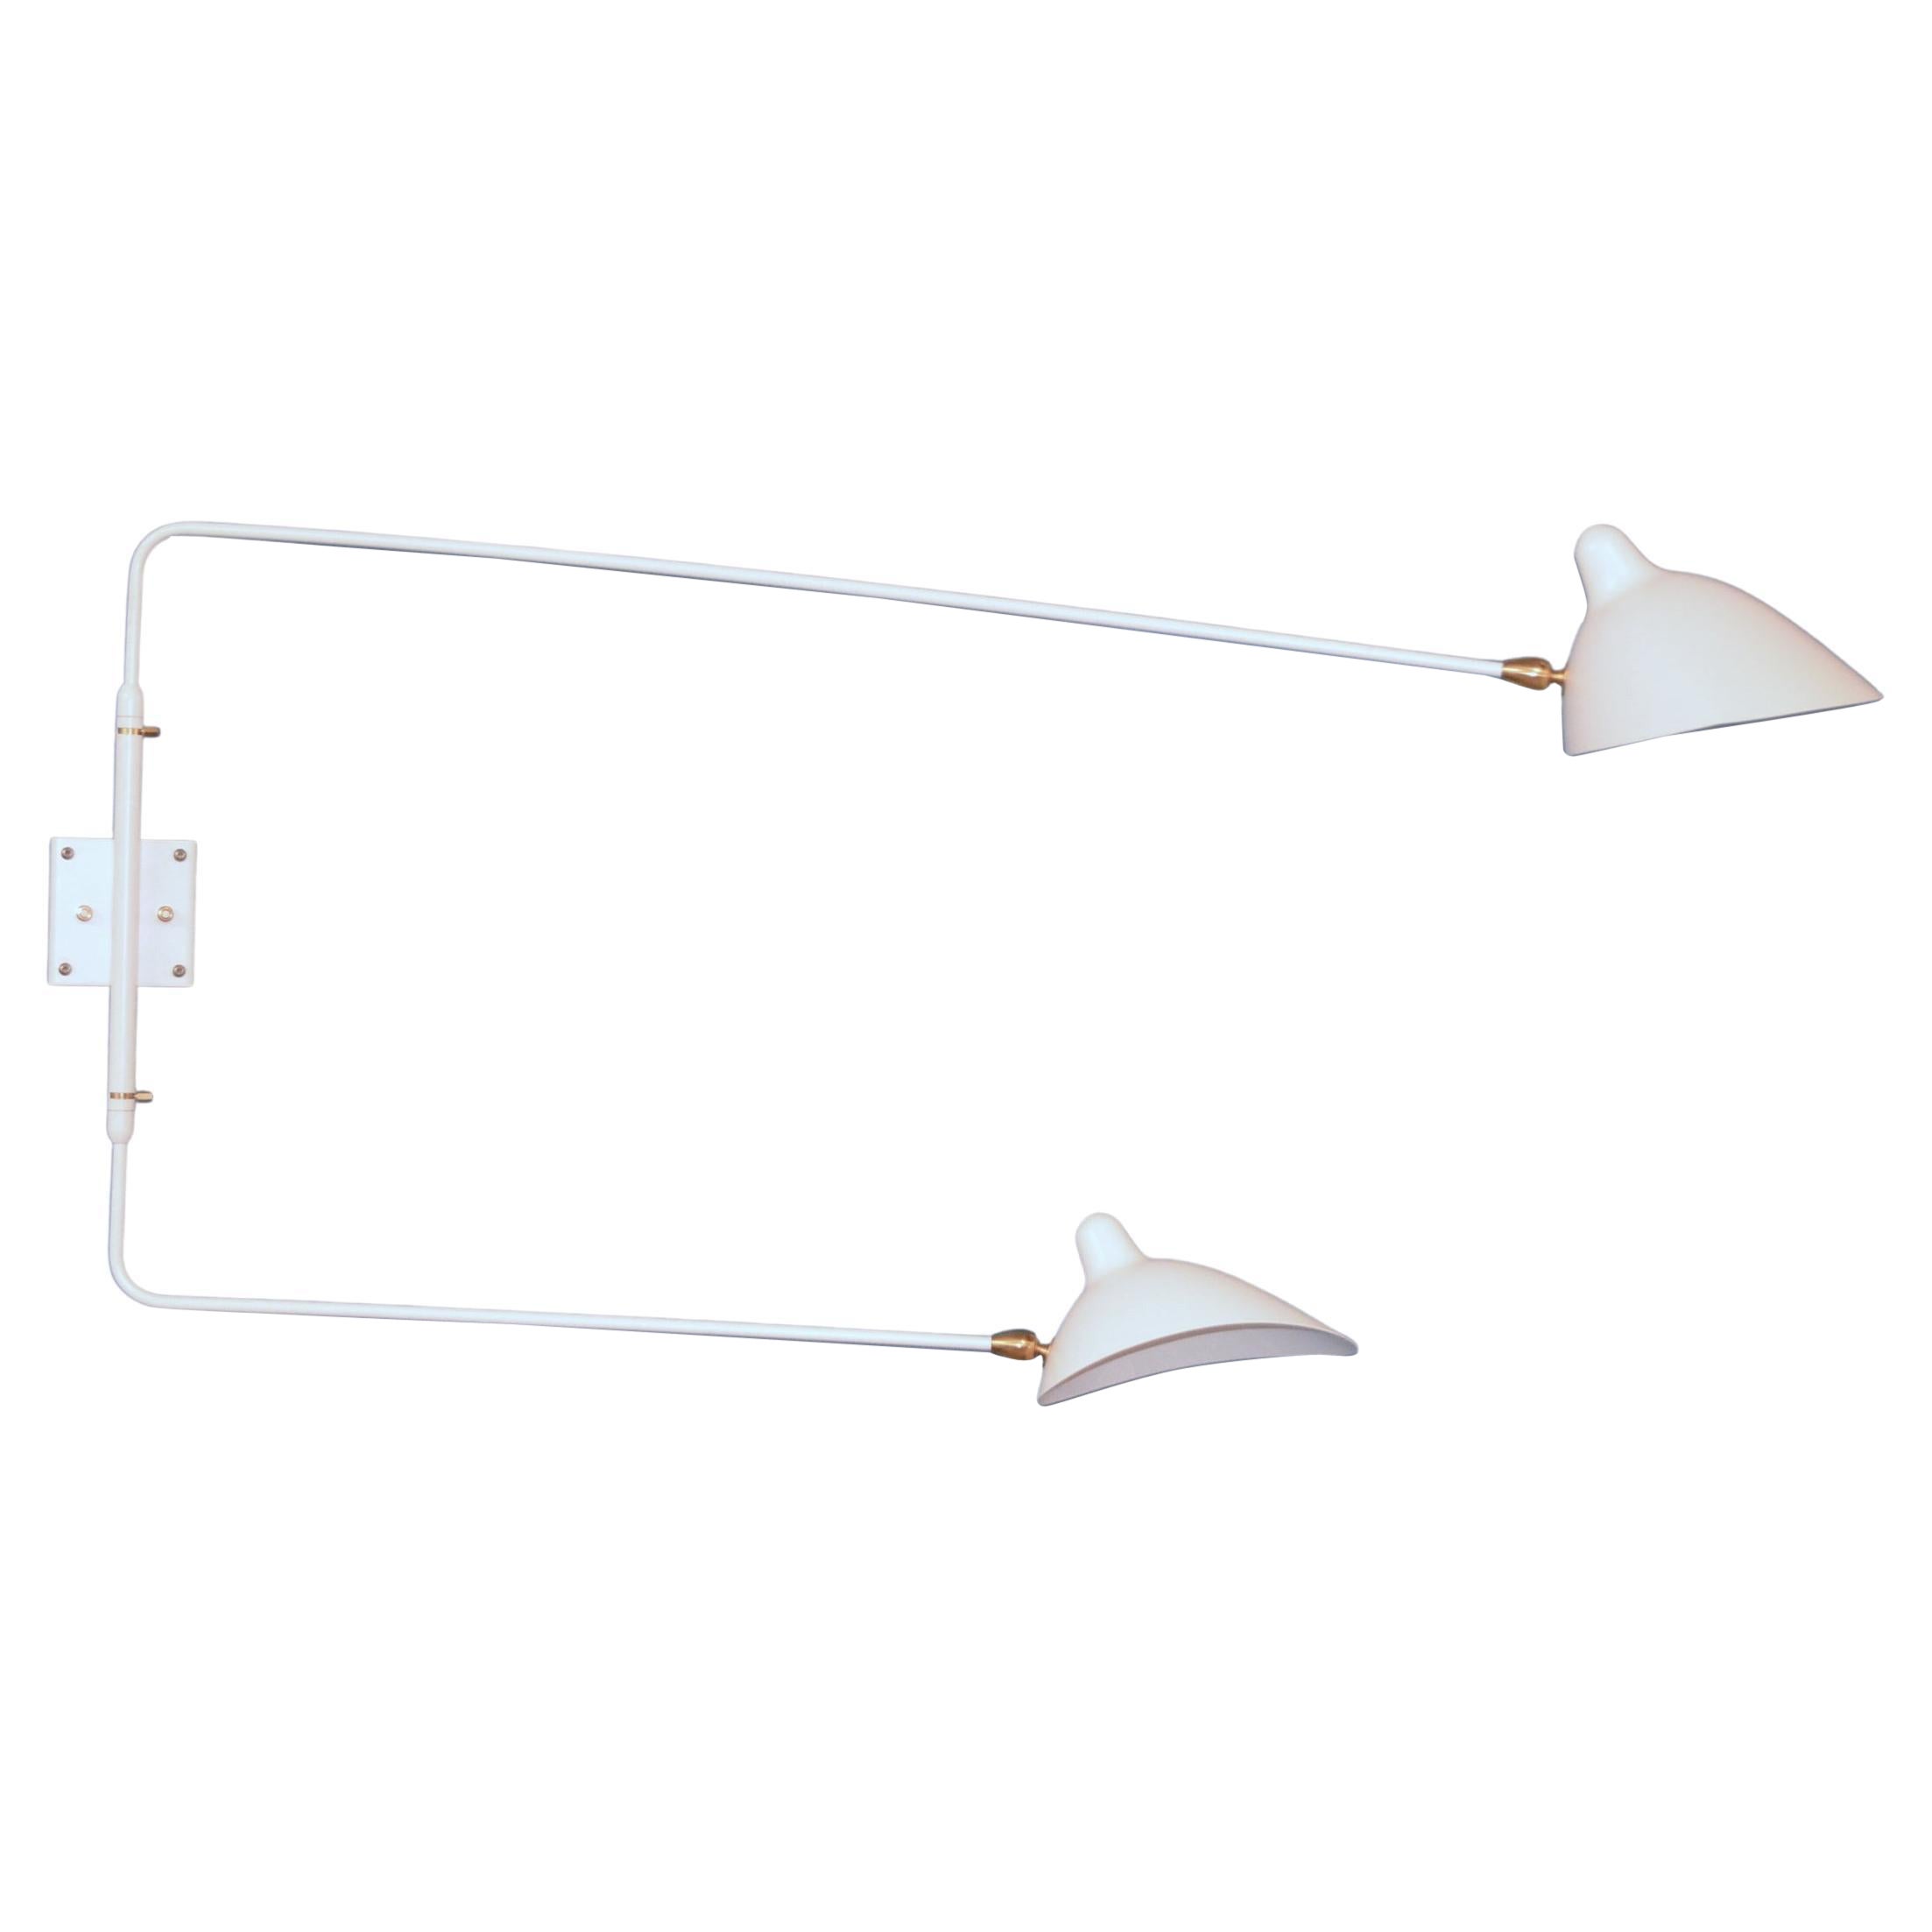 Serge Mouille - Rotating Sconce with 2 Arms in White For Sale